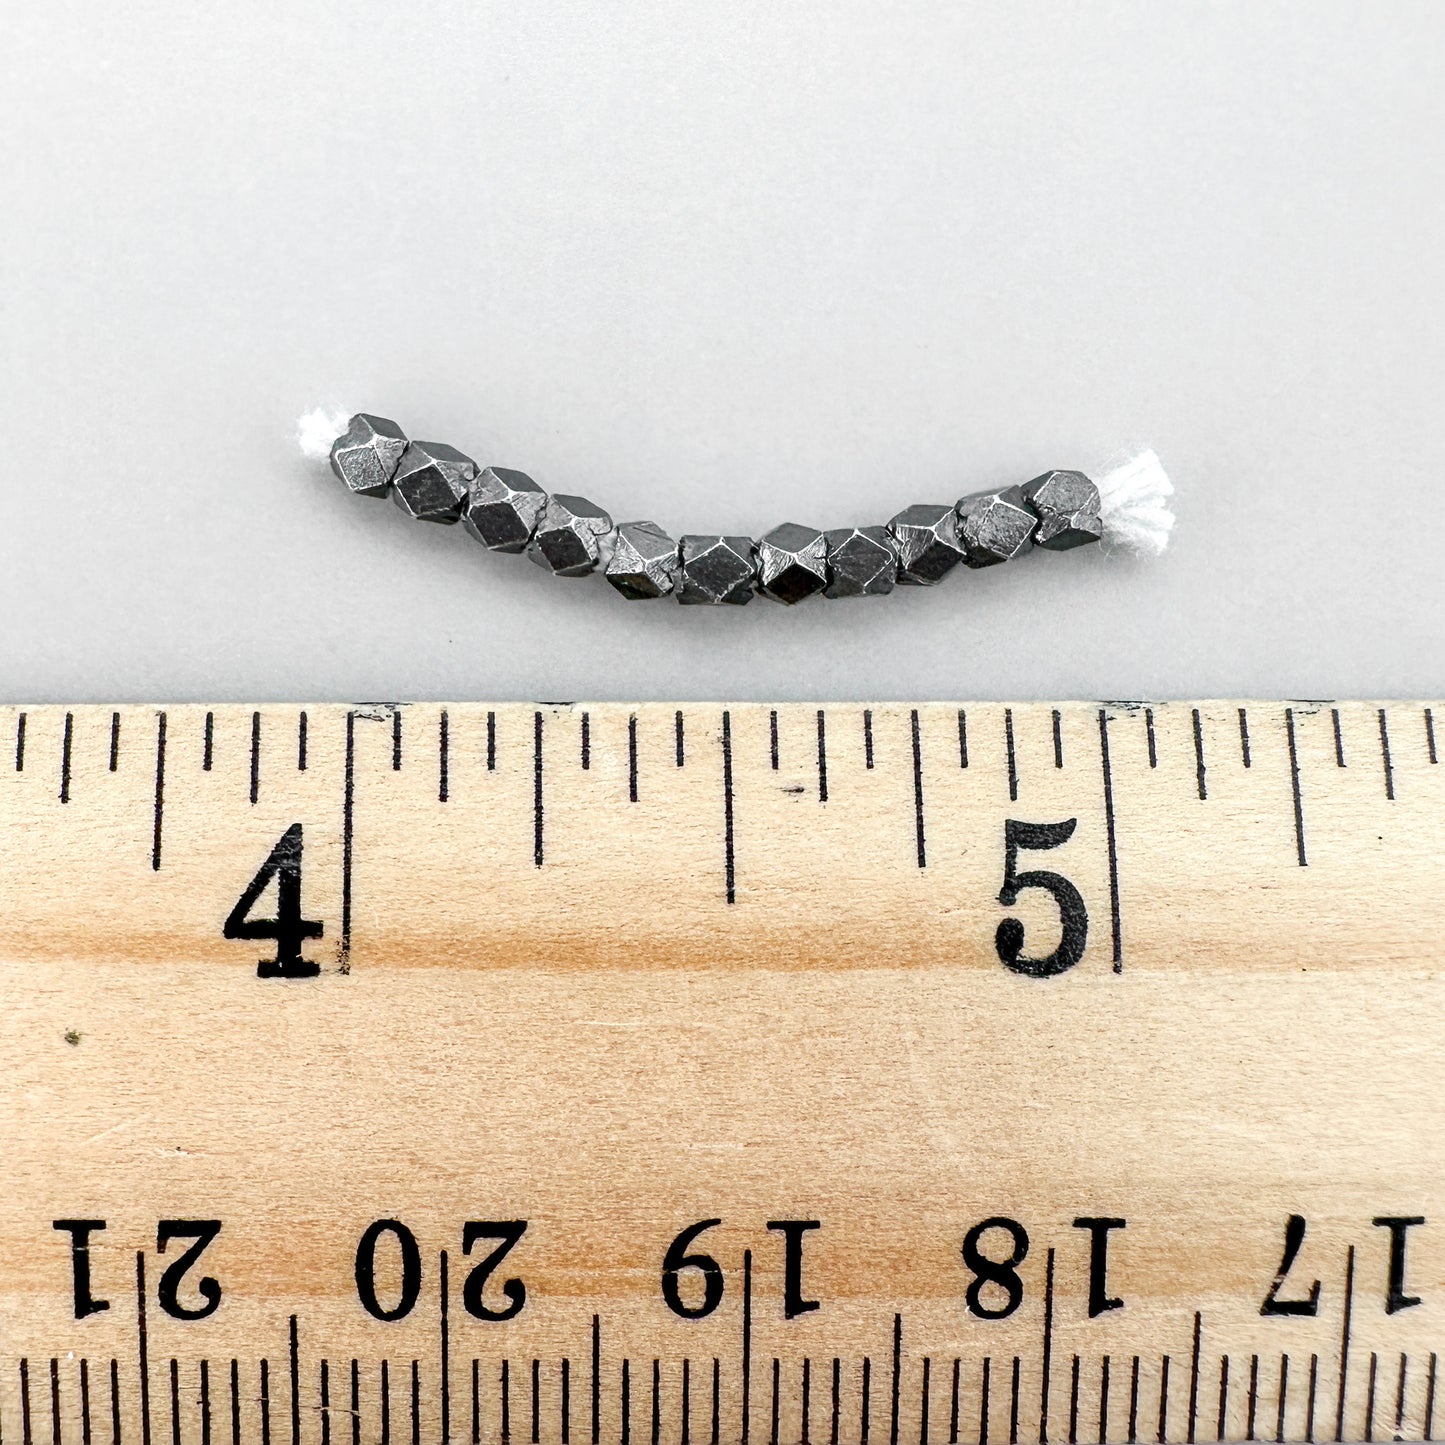 3mm Faceted Bead (Oxidized Thai Silver) - 1 INCH (M438)